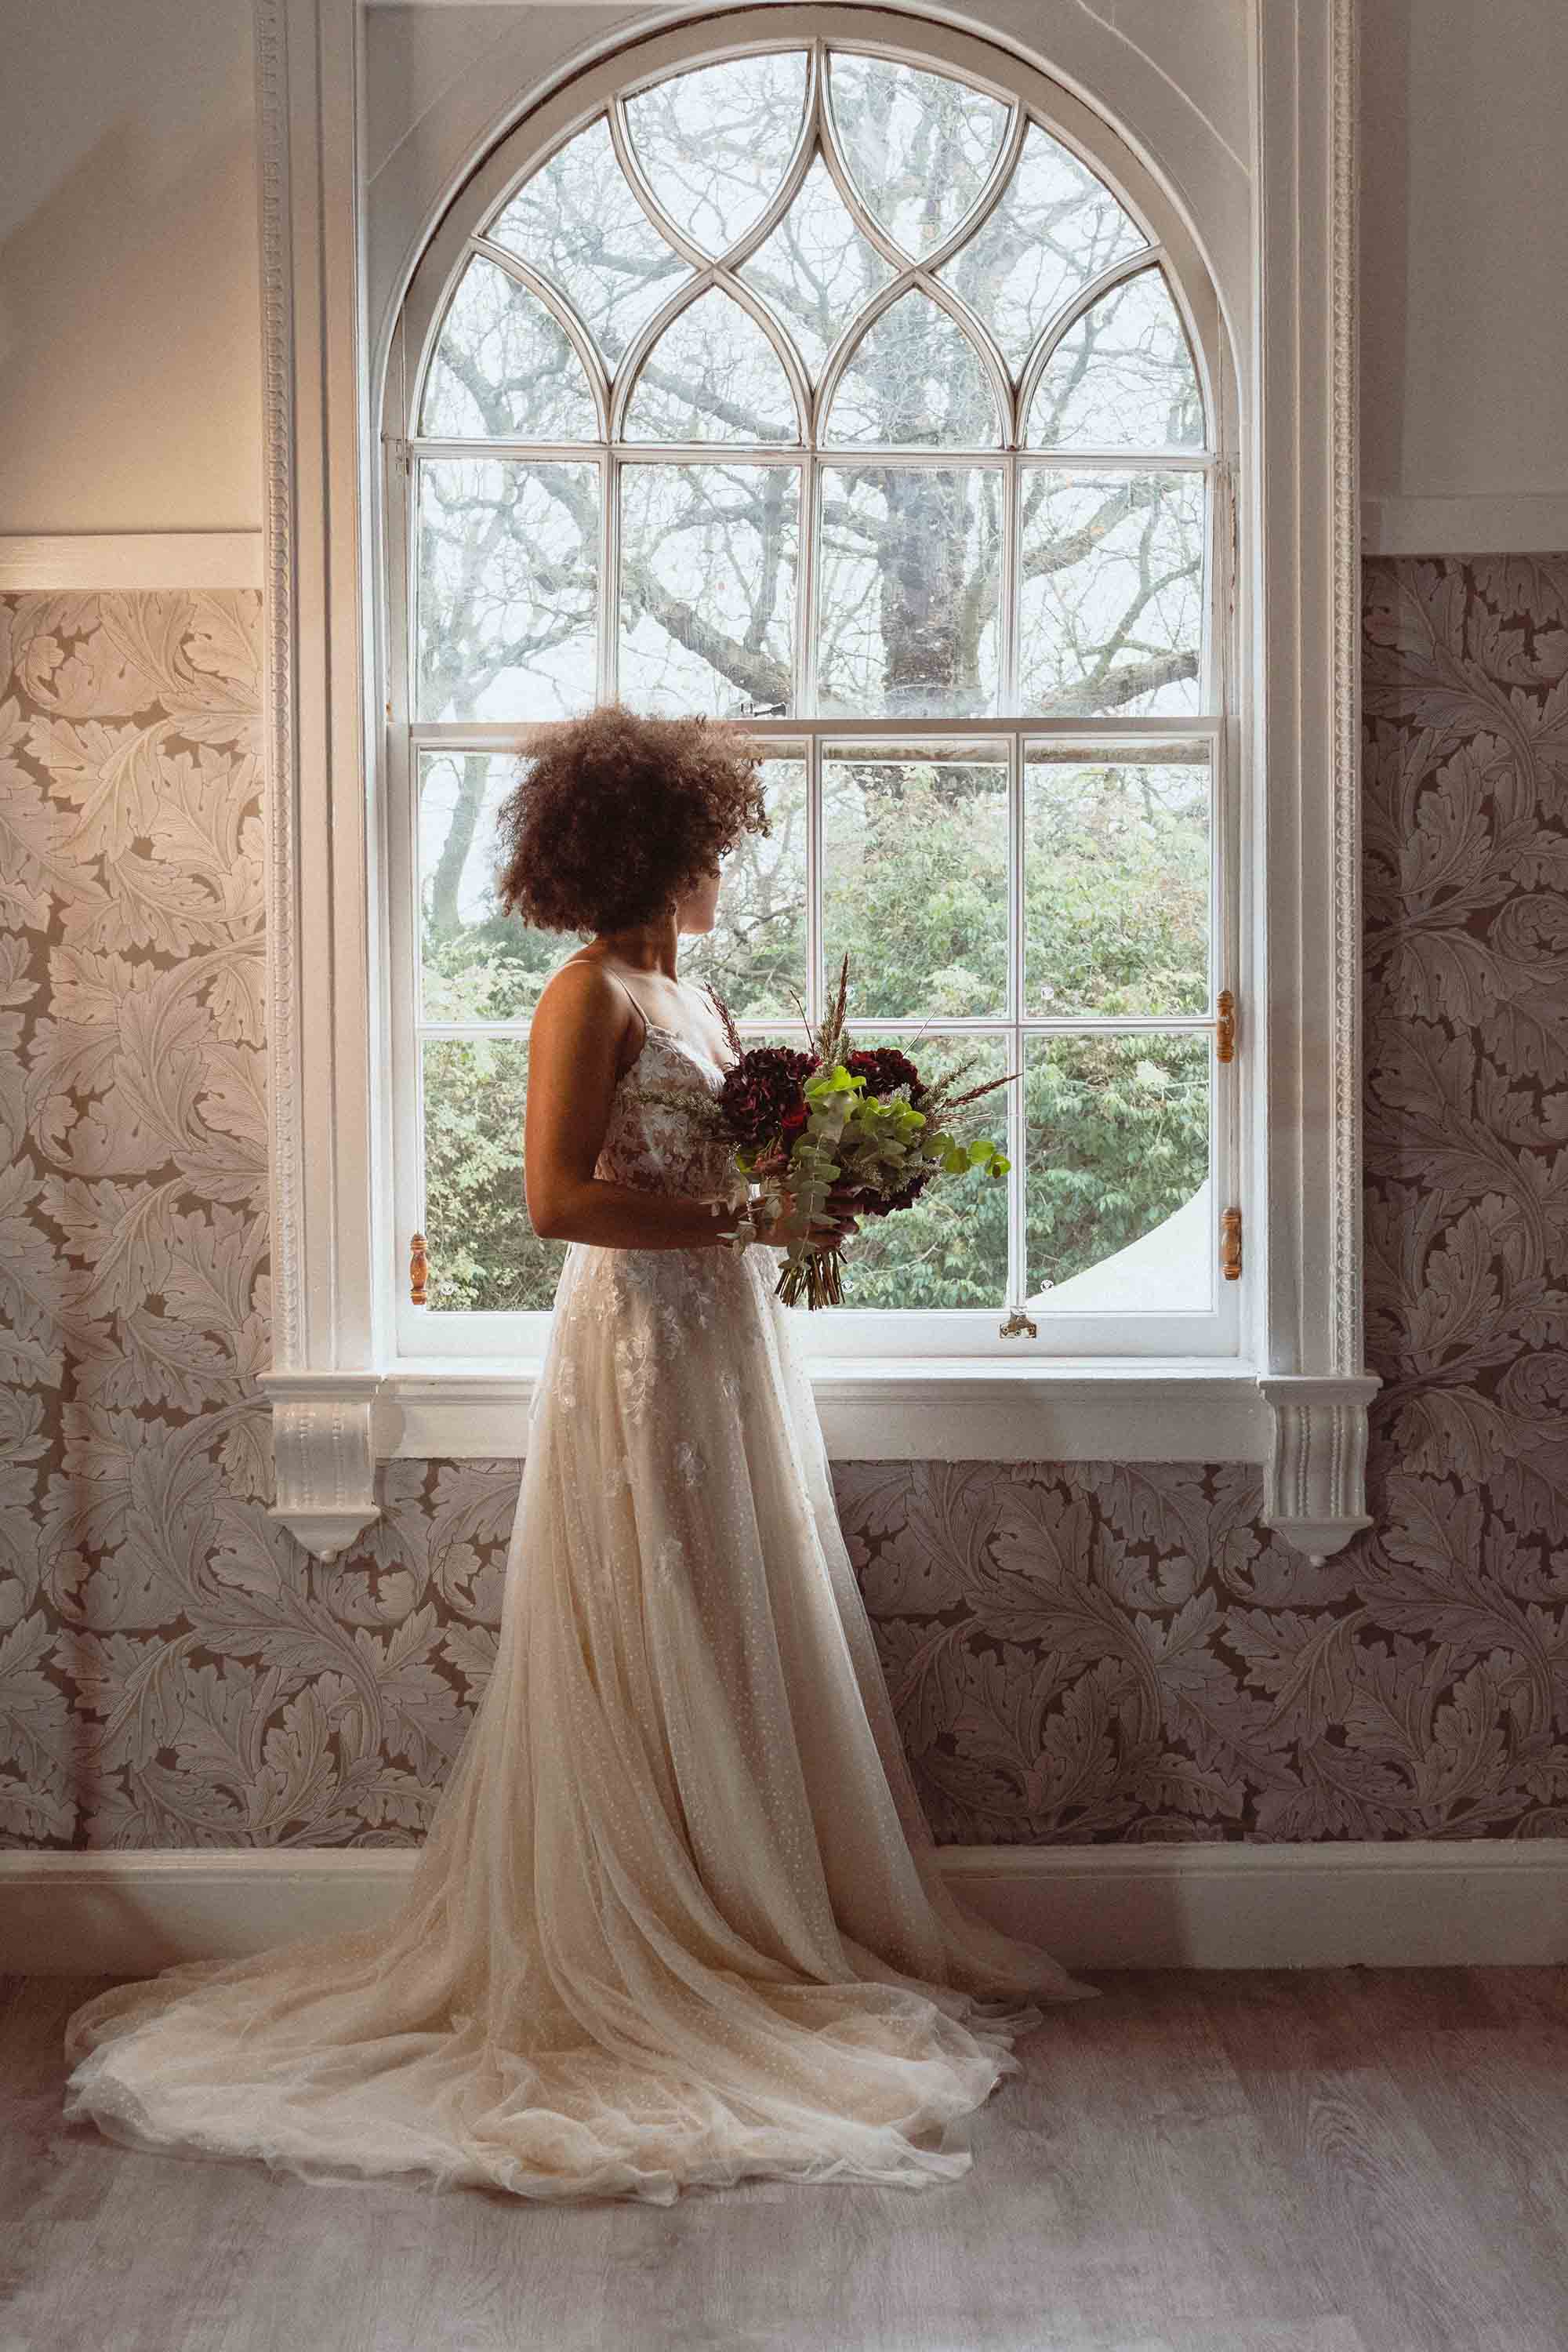 Bride standing in the Window of the dressing room